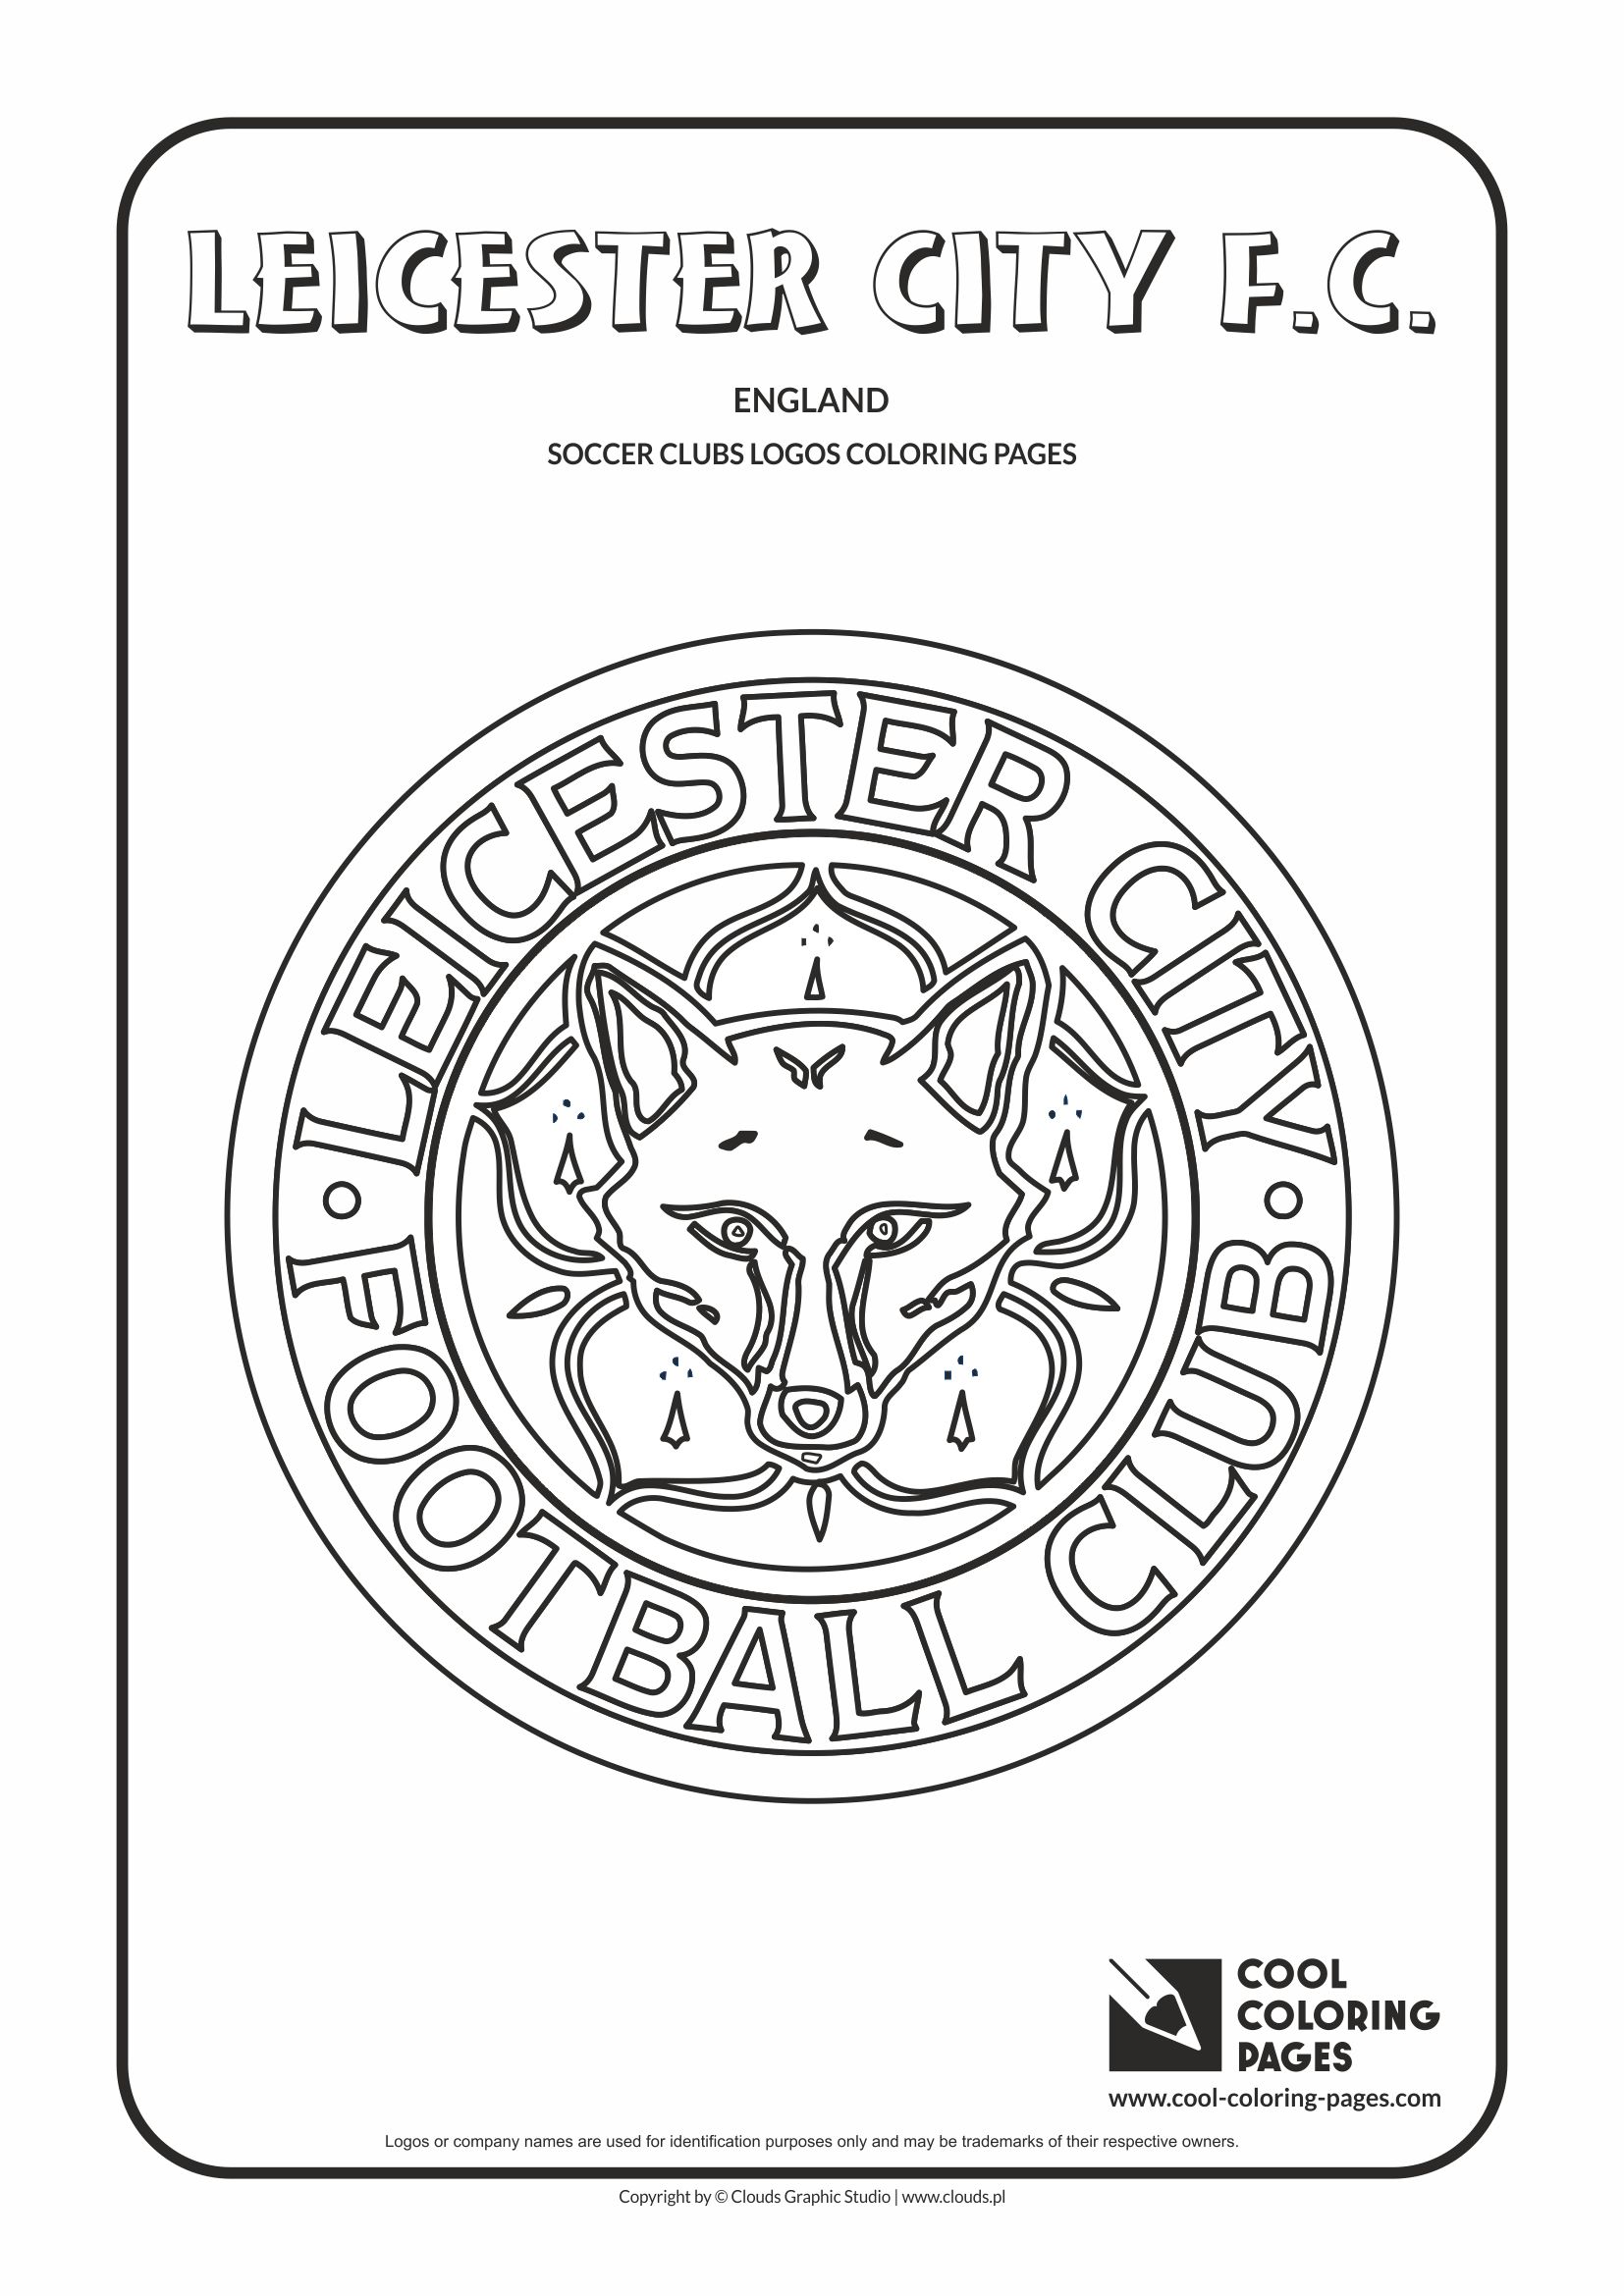 Cool Coloring Pages Soccer Clubs Logos Cool Coloring Pages